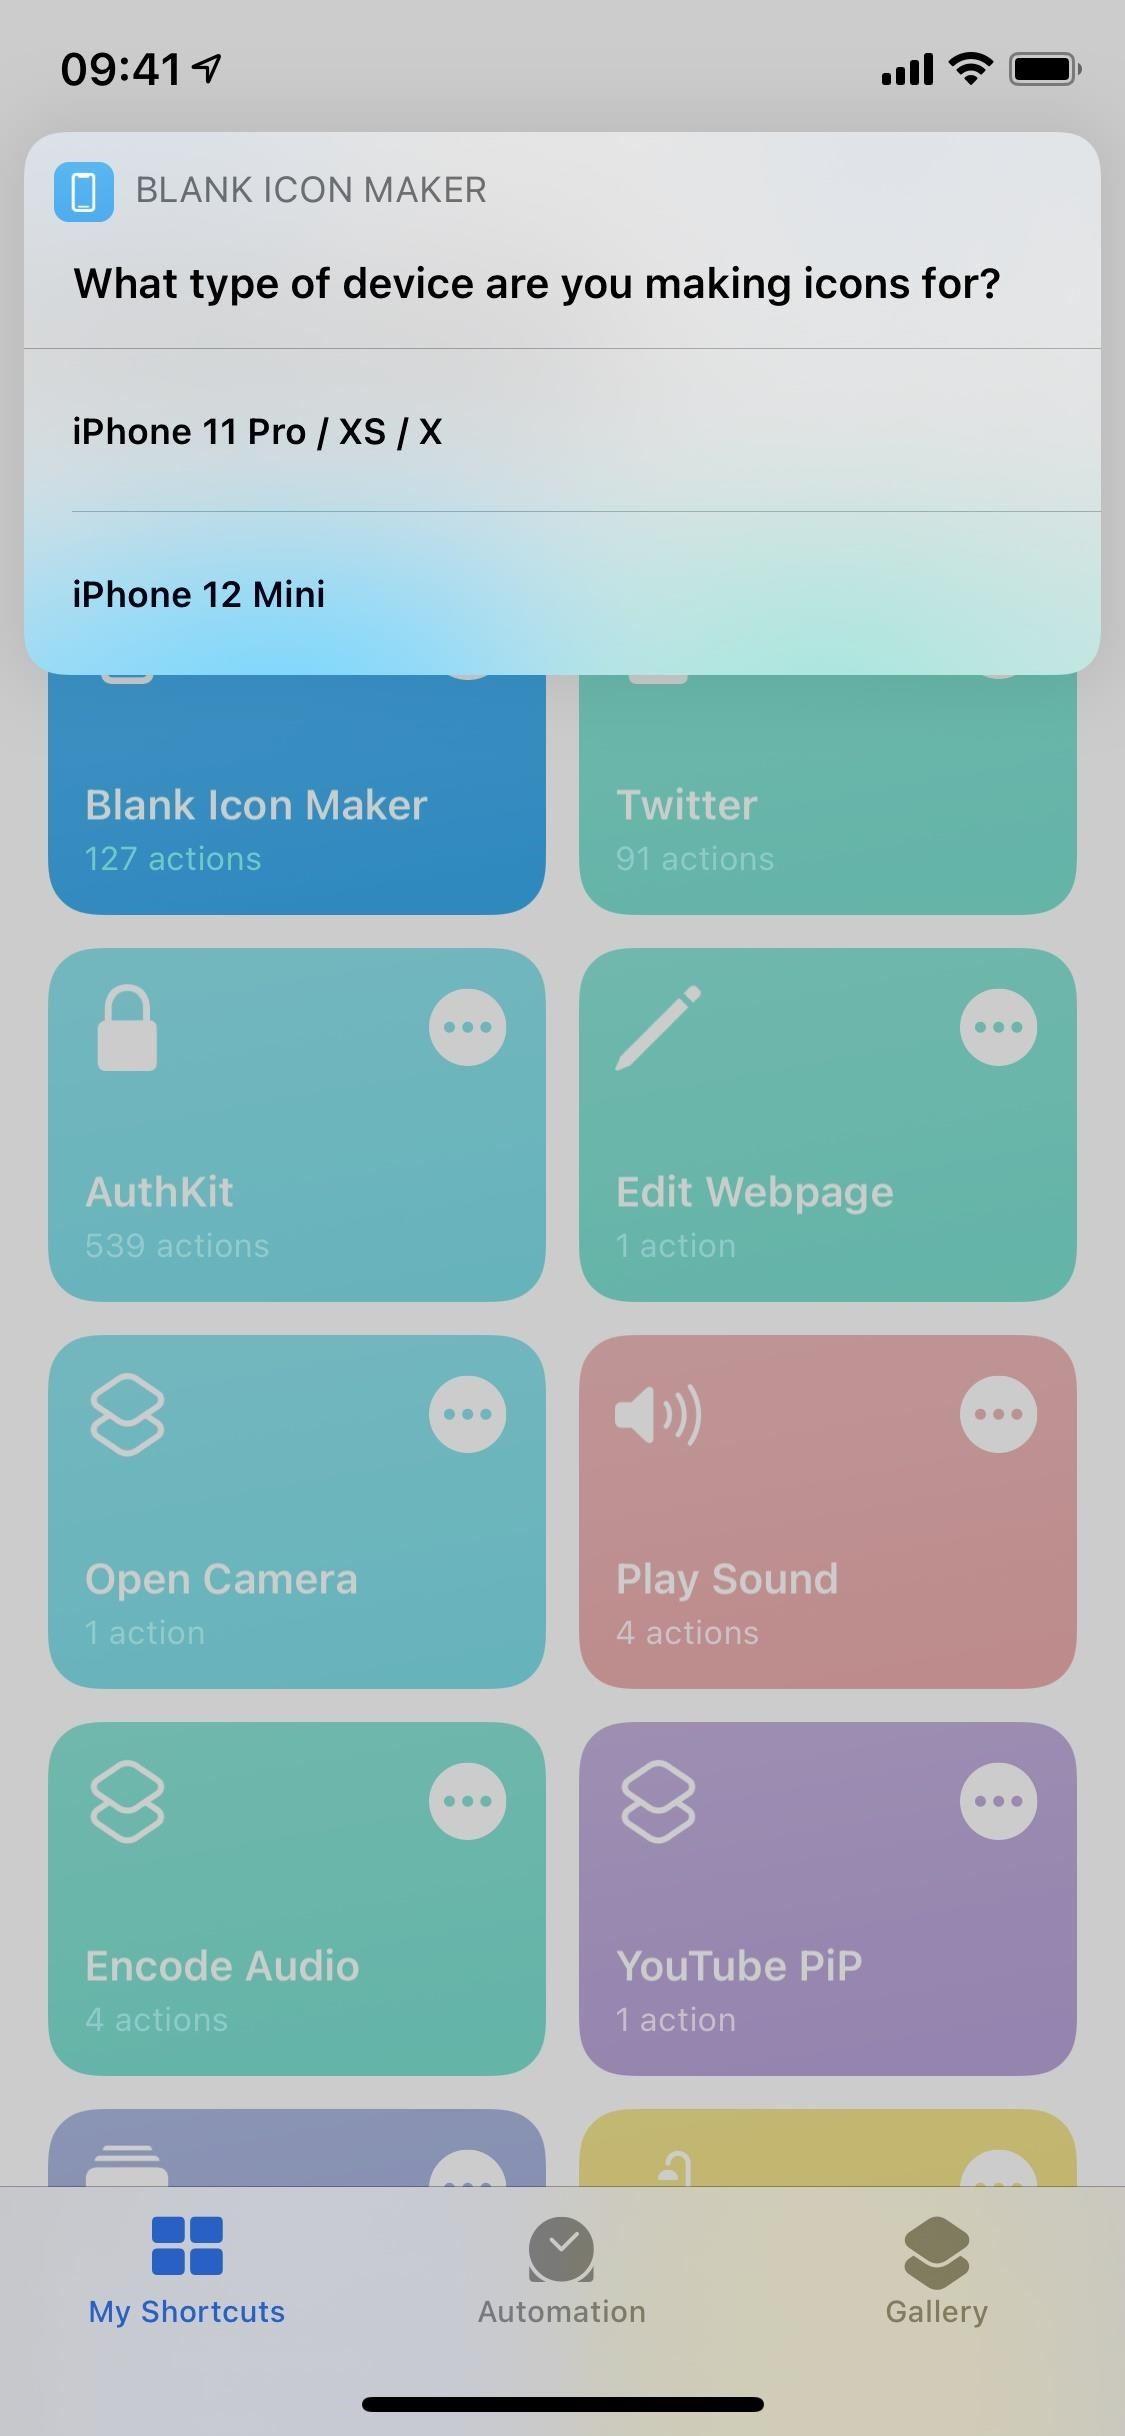 Blank Icon Maker: The Easiest Way to Place Apps, Folders & Widgets Anywhere on Your iPhone's Home Screen